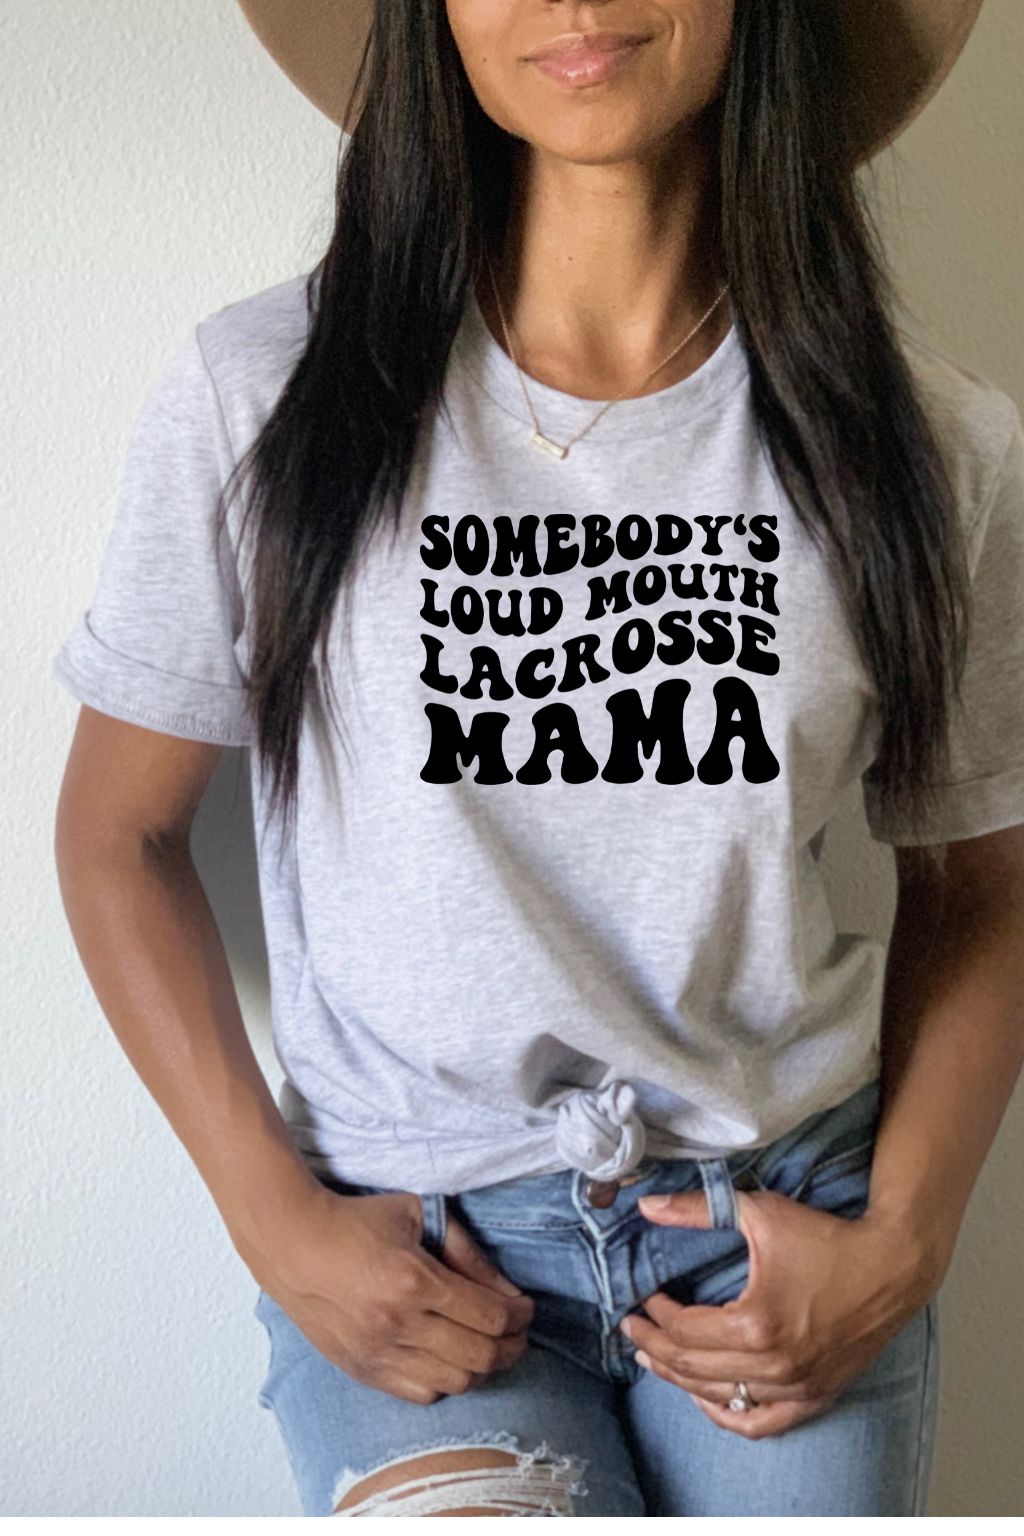 Somebody's Loud Mouth Lacrosse Mama Tee